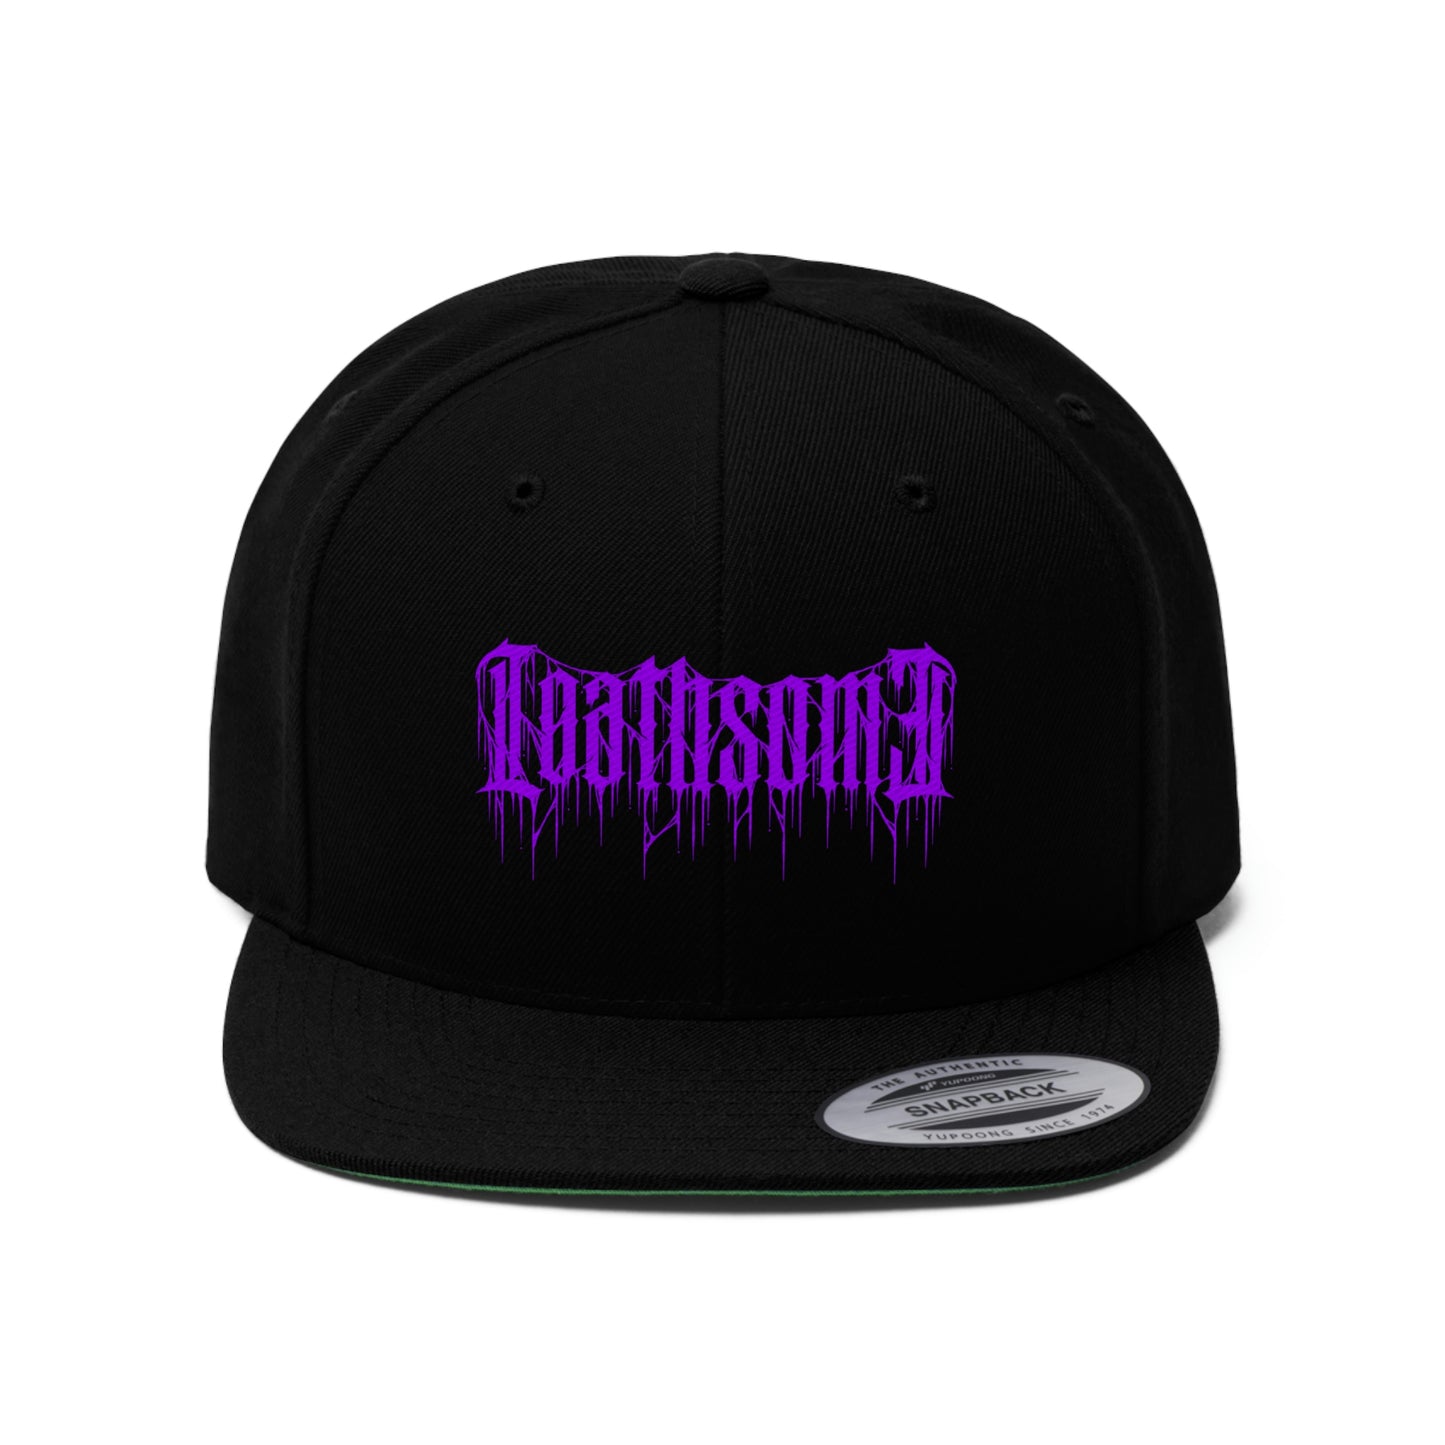 Loathsome Snap Back